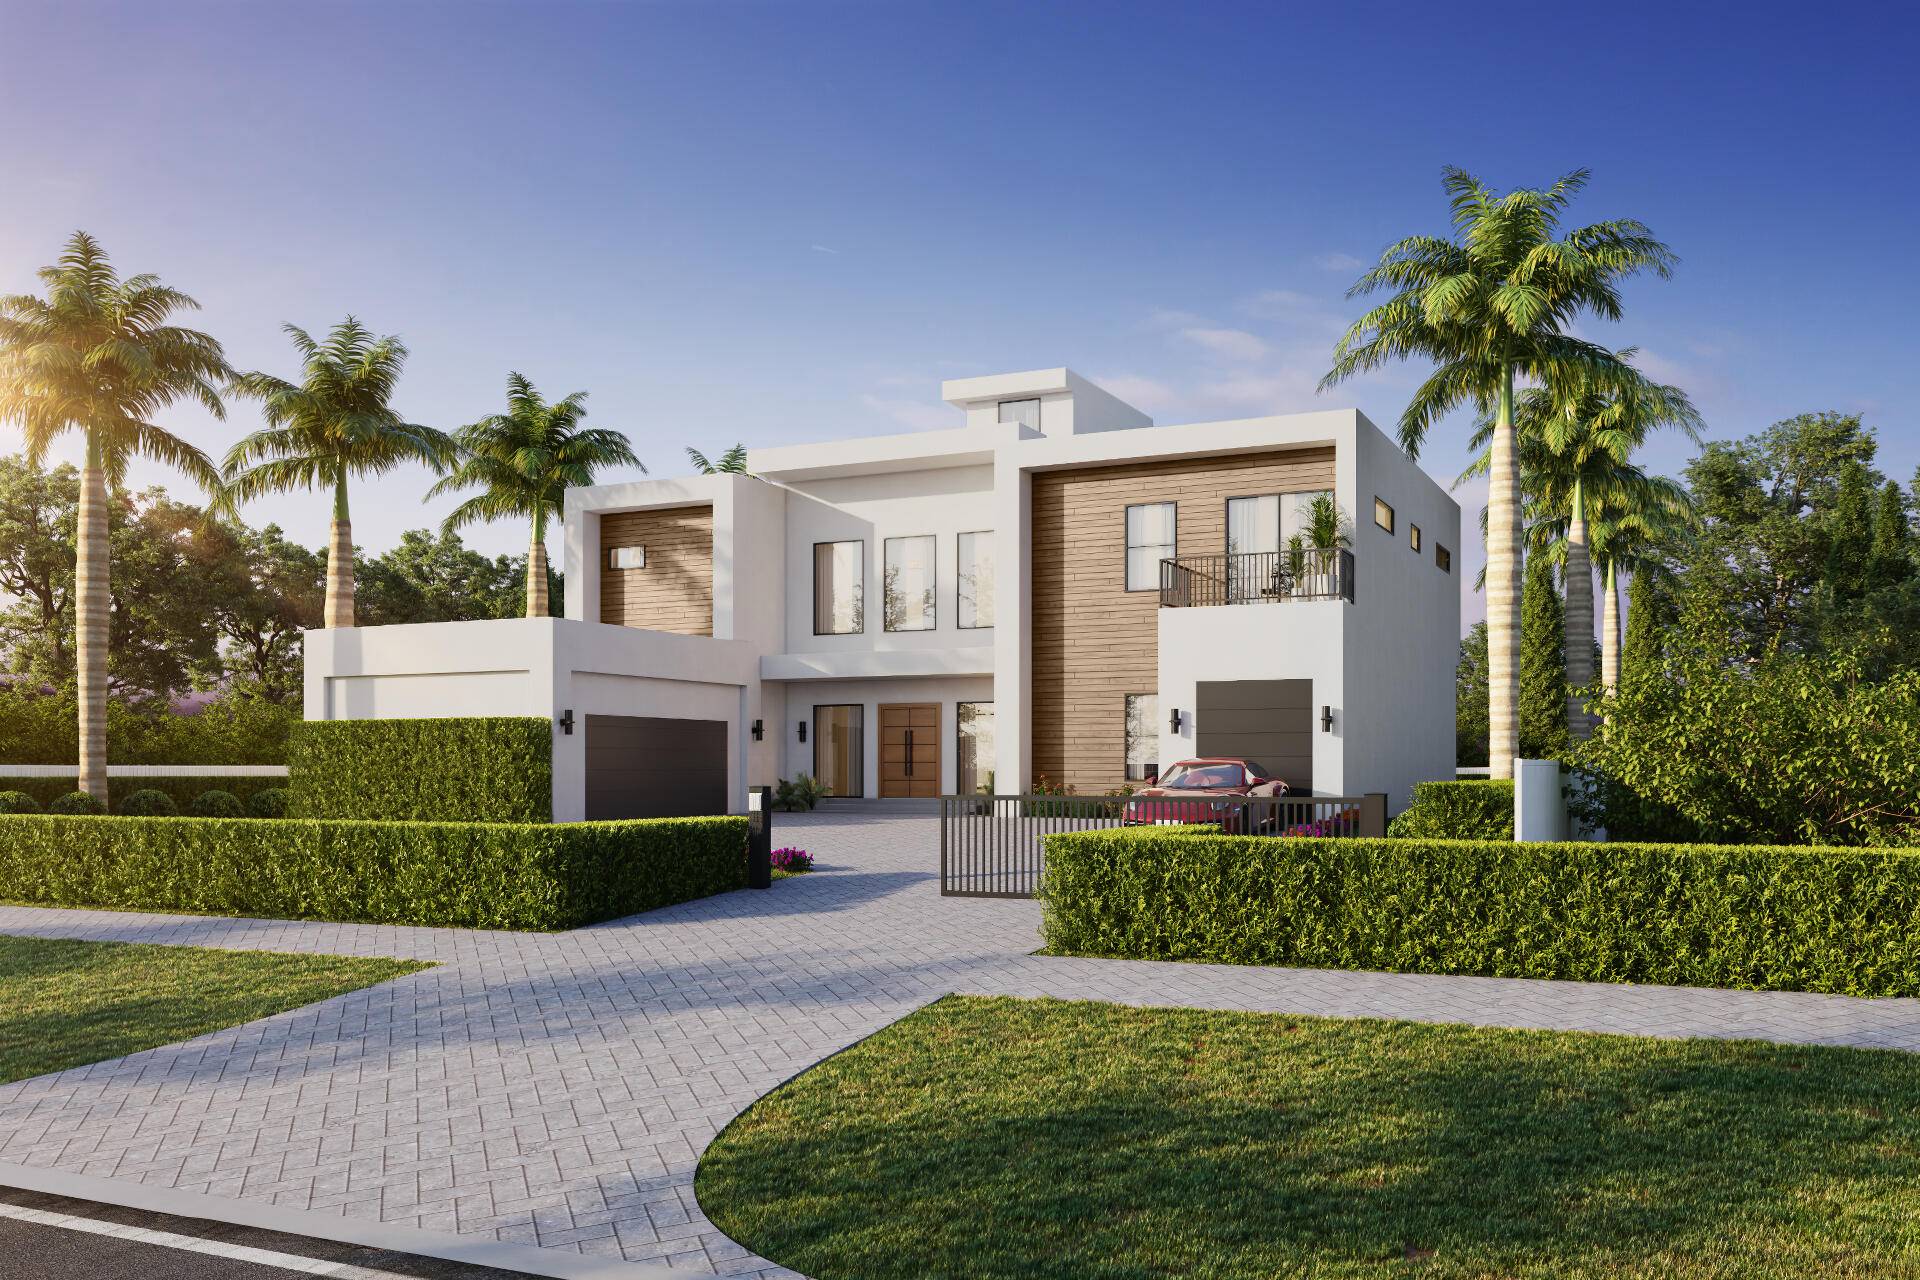 Your new lifestyle will exceed your expectations in this eloquently designed contemporary beach estate.